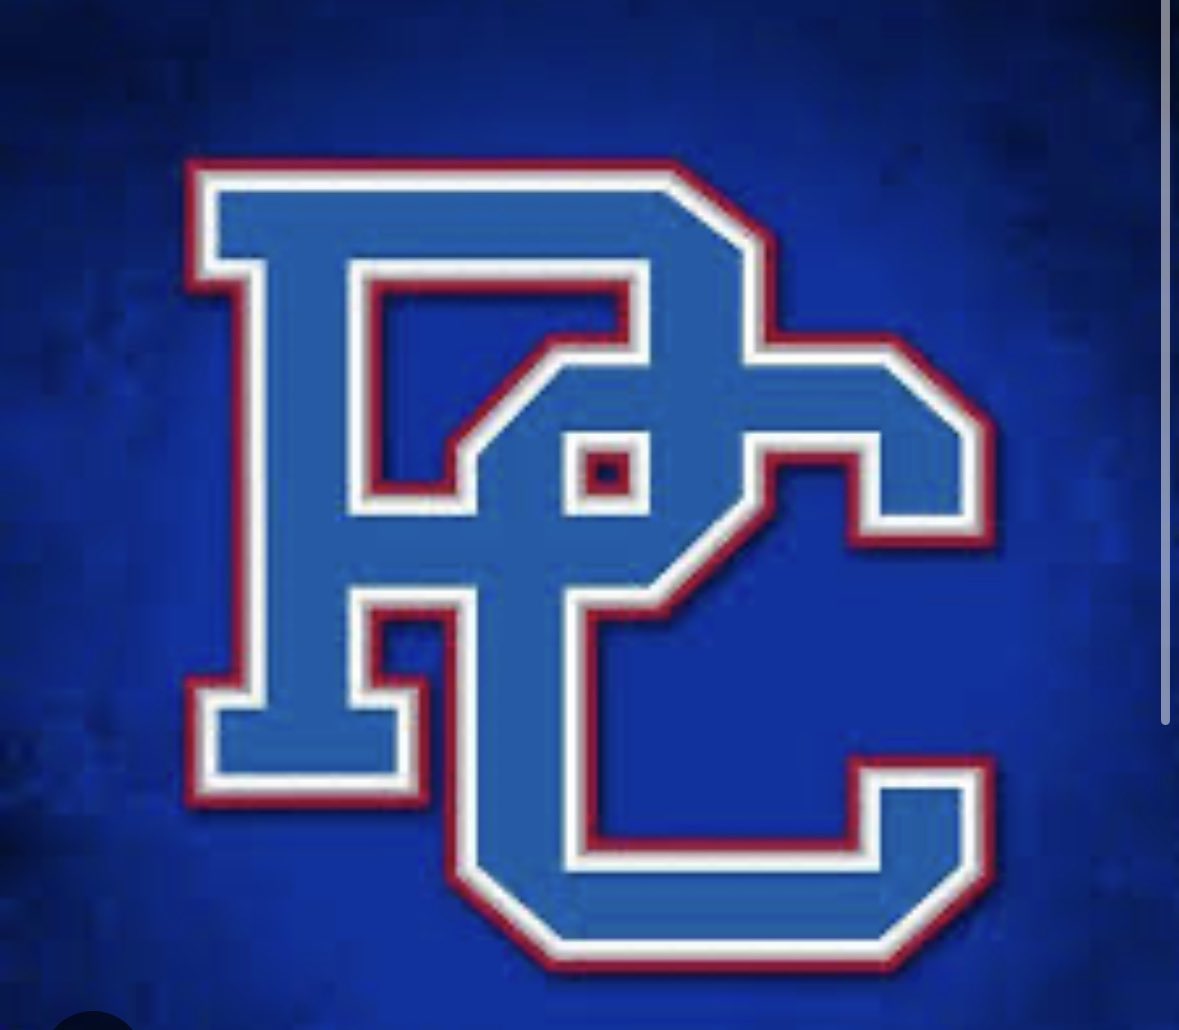 After a great visit @BlueHoseFtball I am blessed to have received a Division 1 offer from Presbyterian College!!! Thank you @CoachKirkendall for the opportunity!!! @train0187 @DanOrnerKicking @Coach_RHarris @pat_stoddard